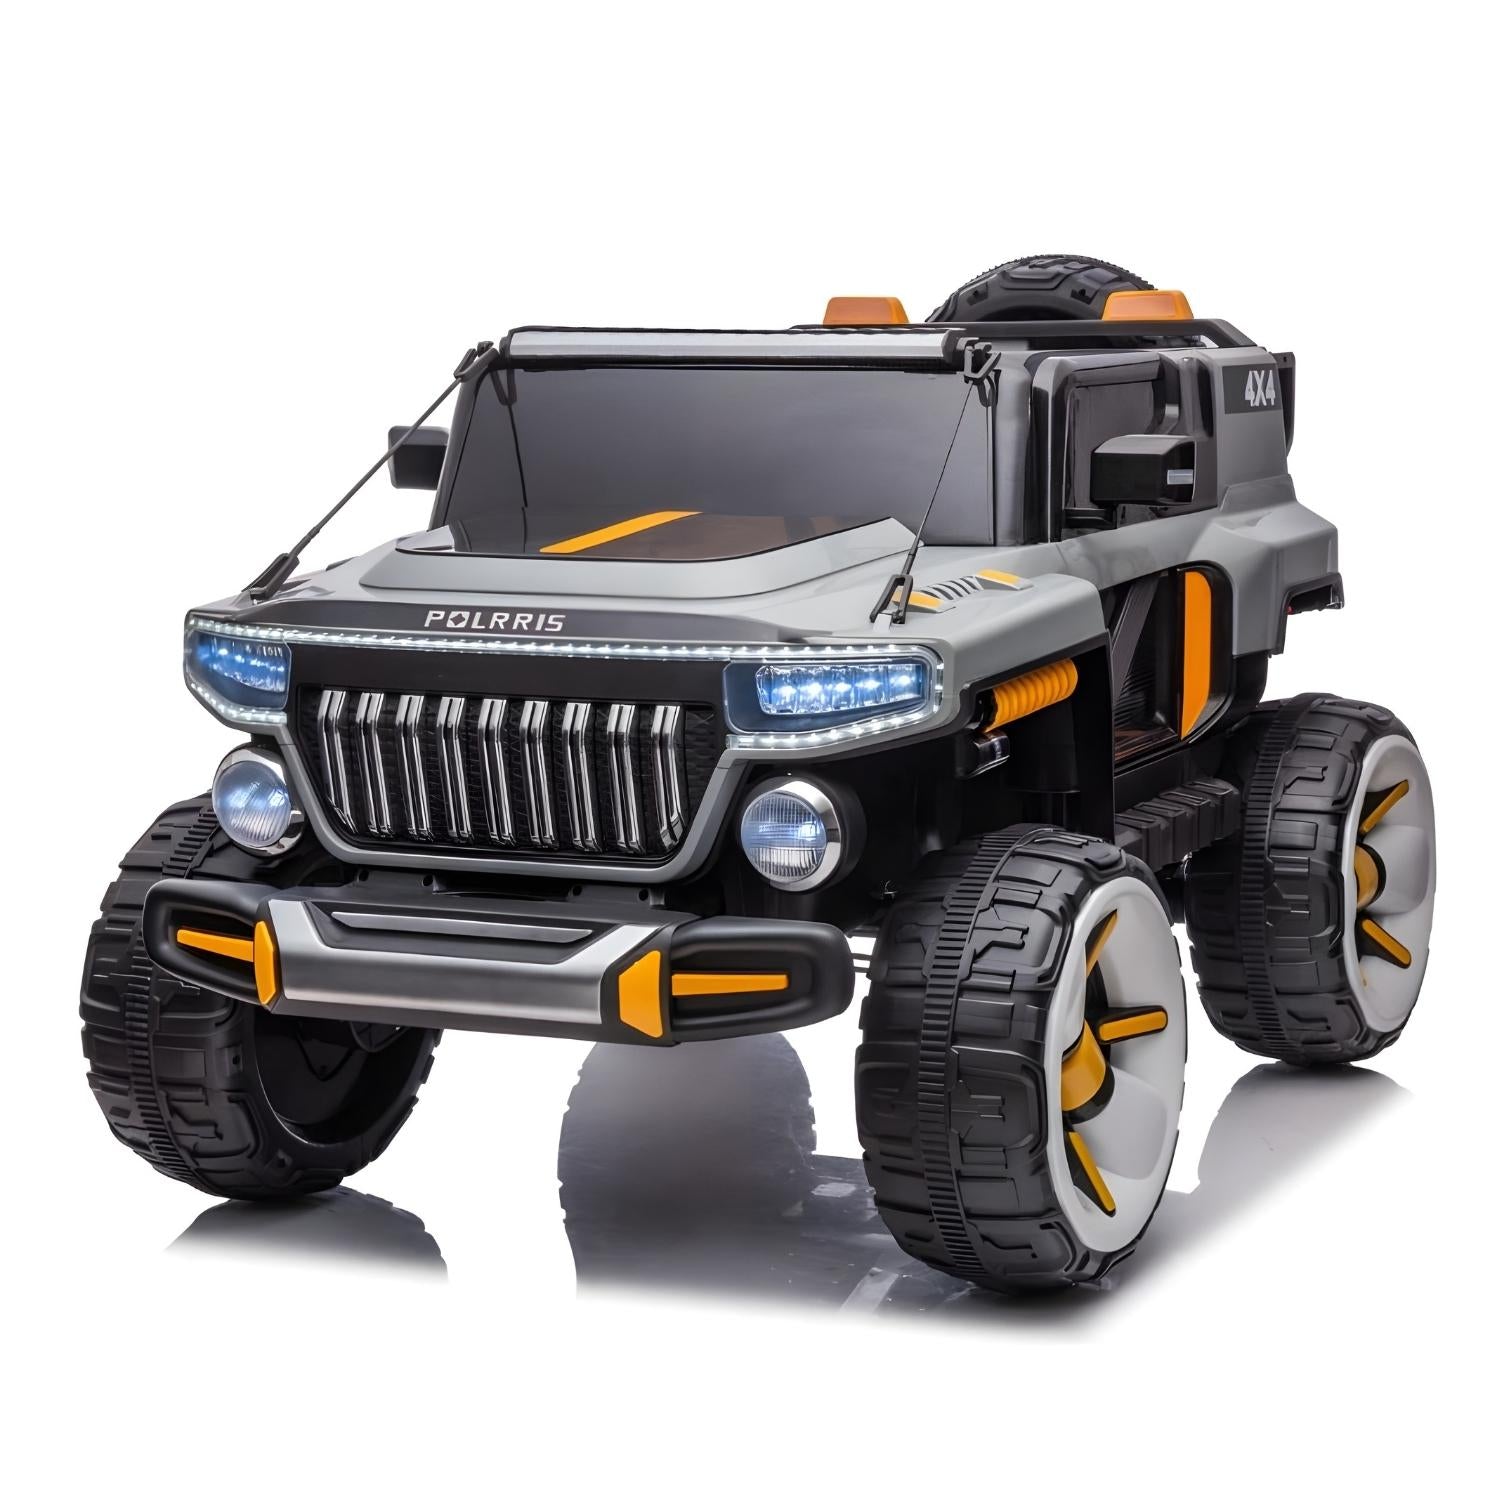 Baby Moo Electric Ride-on Jeep for Kids With Rechargeable 12V Battery, LED Lights, Music and USB Port Remote Control Double Seat - Grey